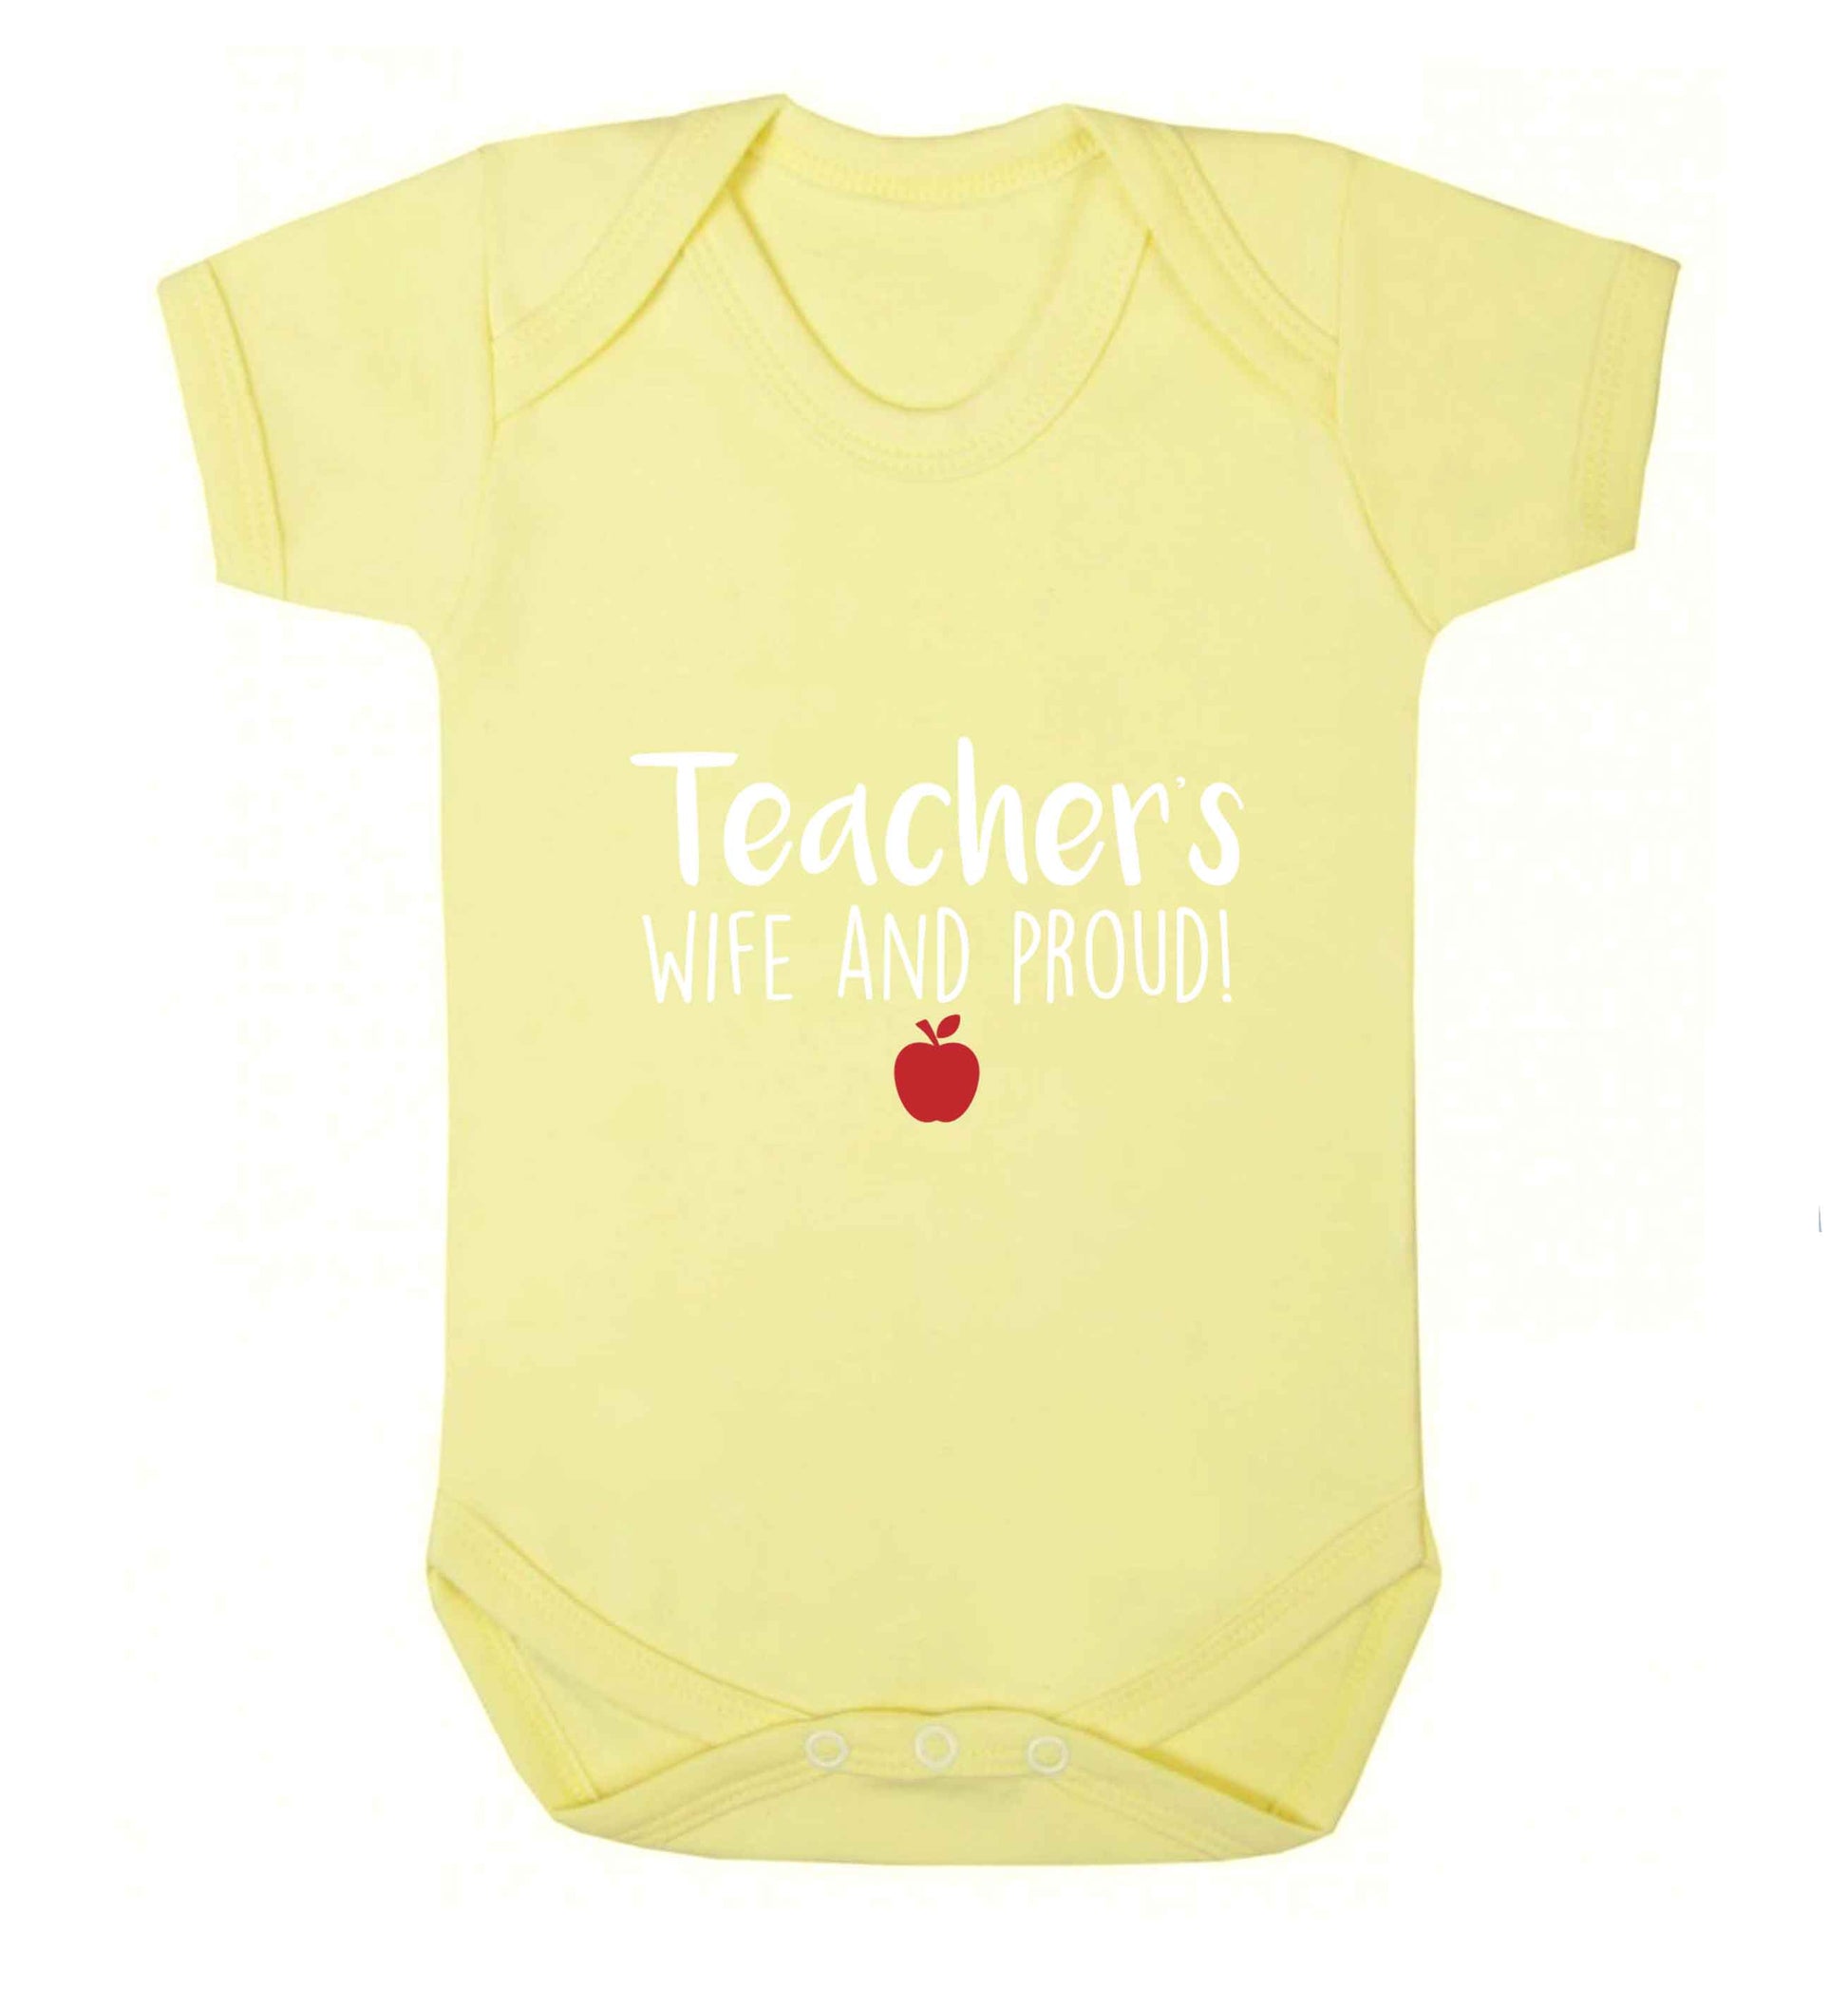 Teachers wife and proud baby vest pale yellow 18-24 months